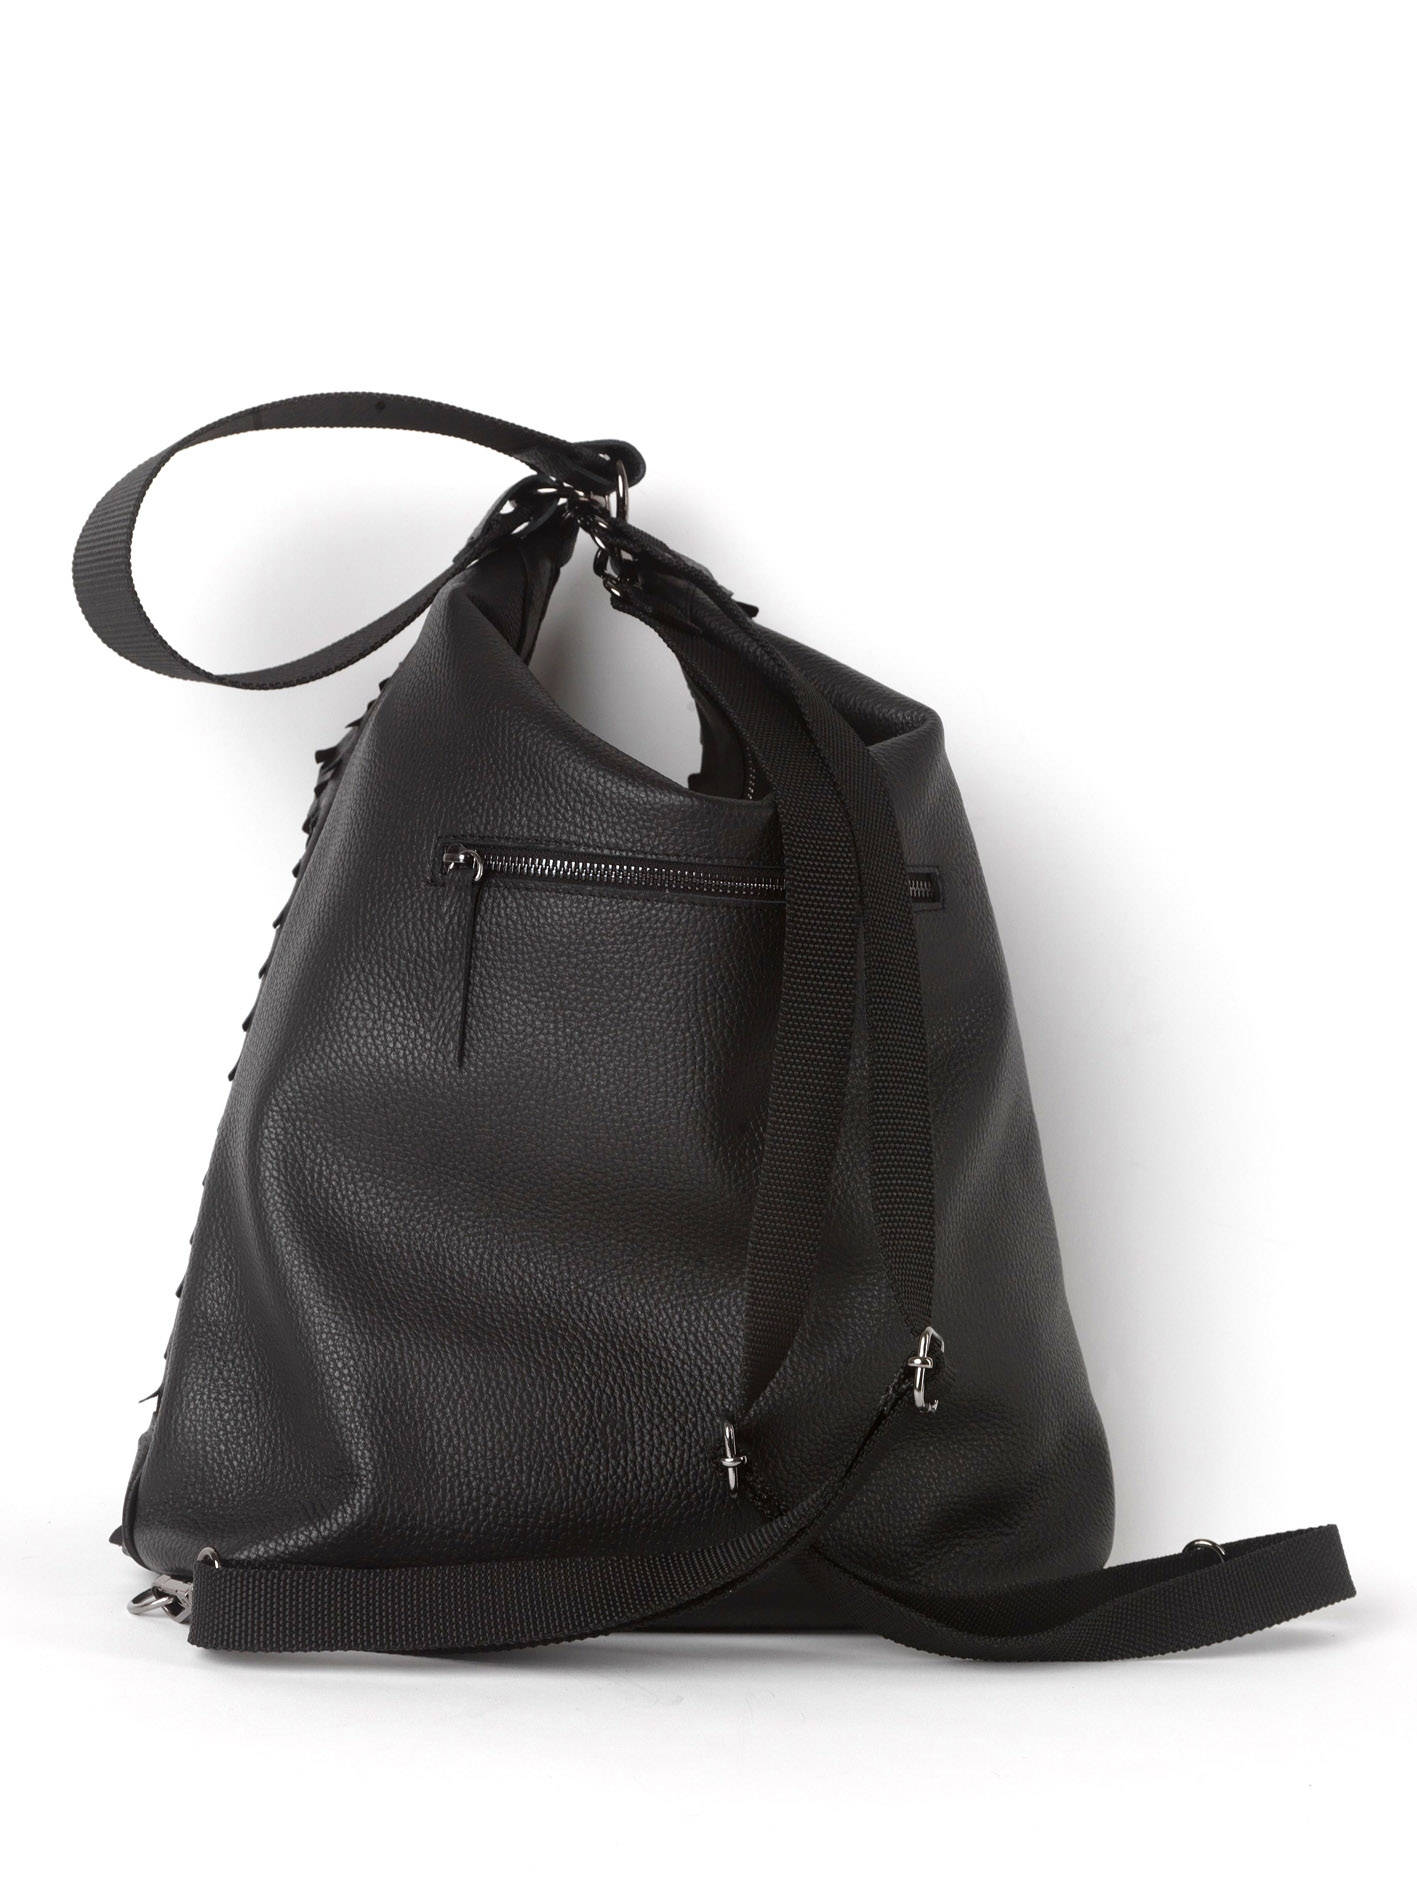 Leather Perforated Black Hobo Convertible Bag - Etsy